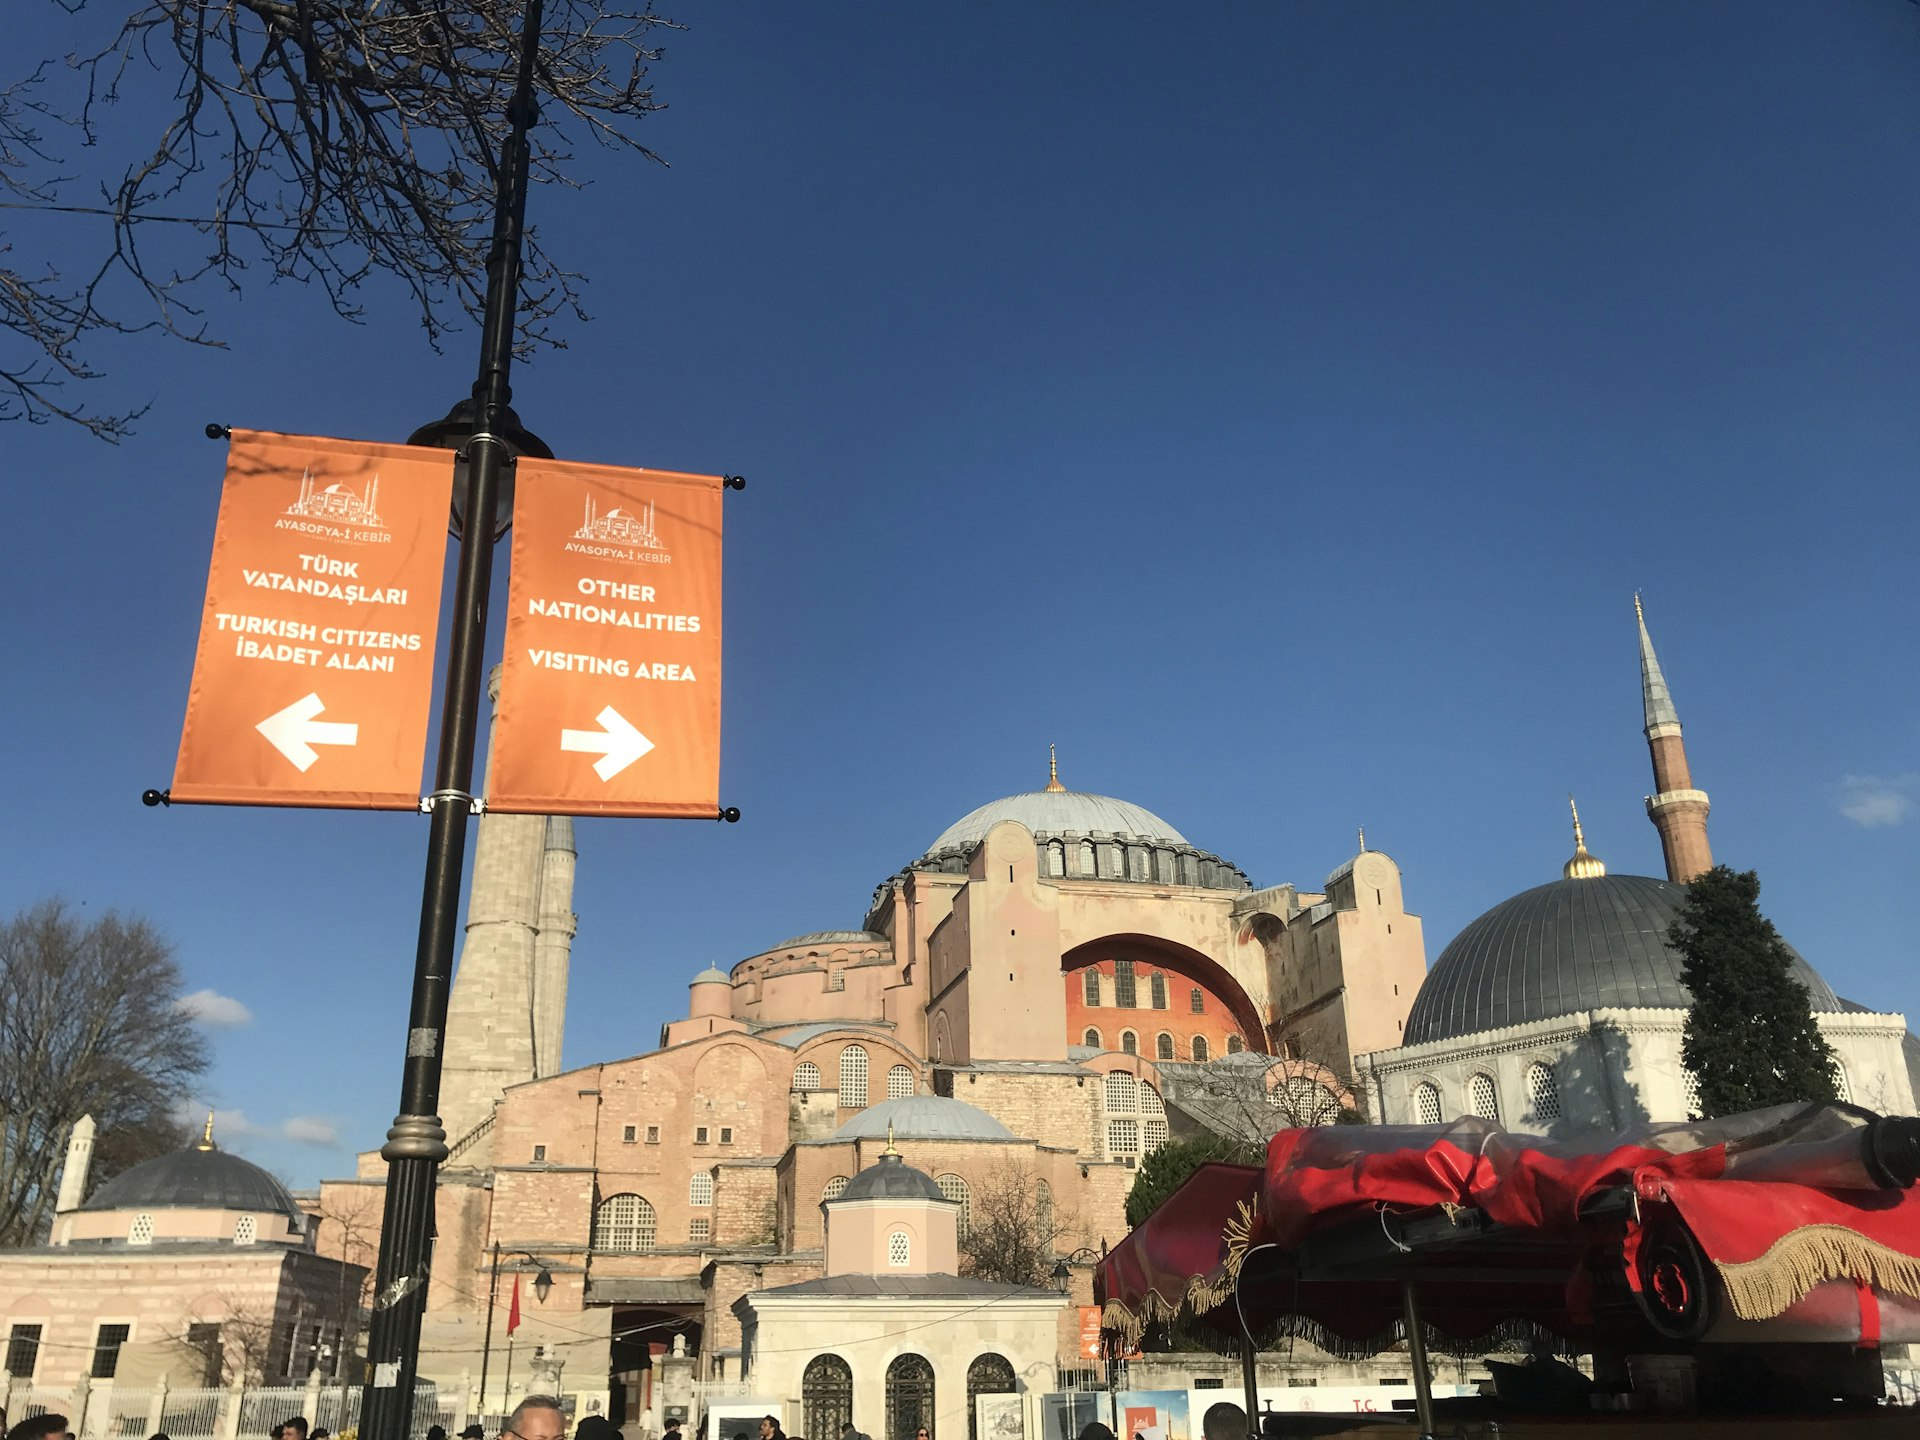  Image of a signpost outside Hagia Sophia with two orange signs. The left sign points to the left, indicating the entrance for "Turkish Citizens İbadet Alanı," while the right sign points to the right for "Other Nationalities Visiting Area." The background shows the exterior of Hagia Sophia with its distinctive domes and minarets against a clear blue sky.